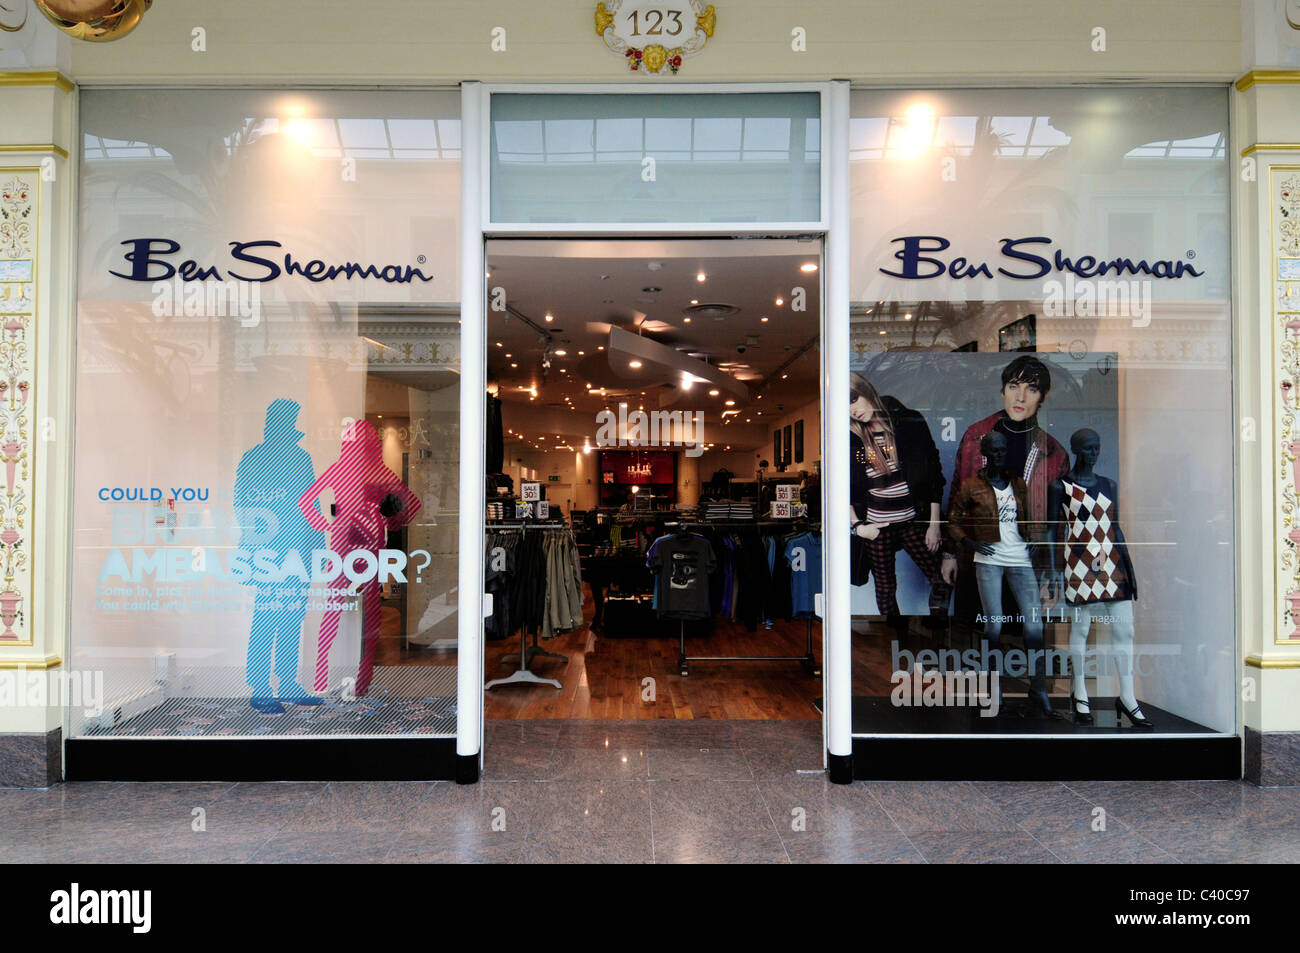 Ben Sherman High Resolution Stock Photography and Images - Alamy